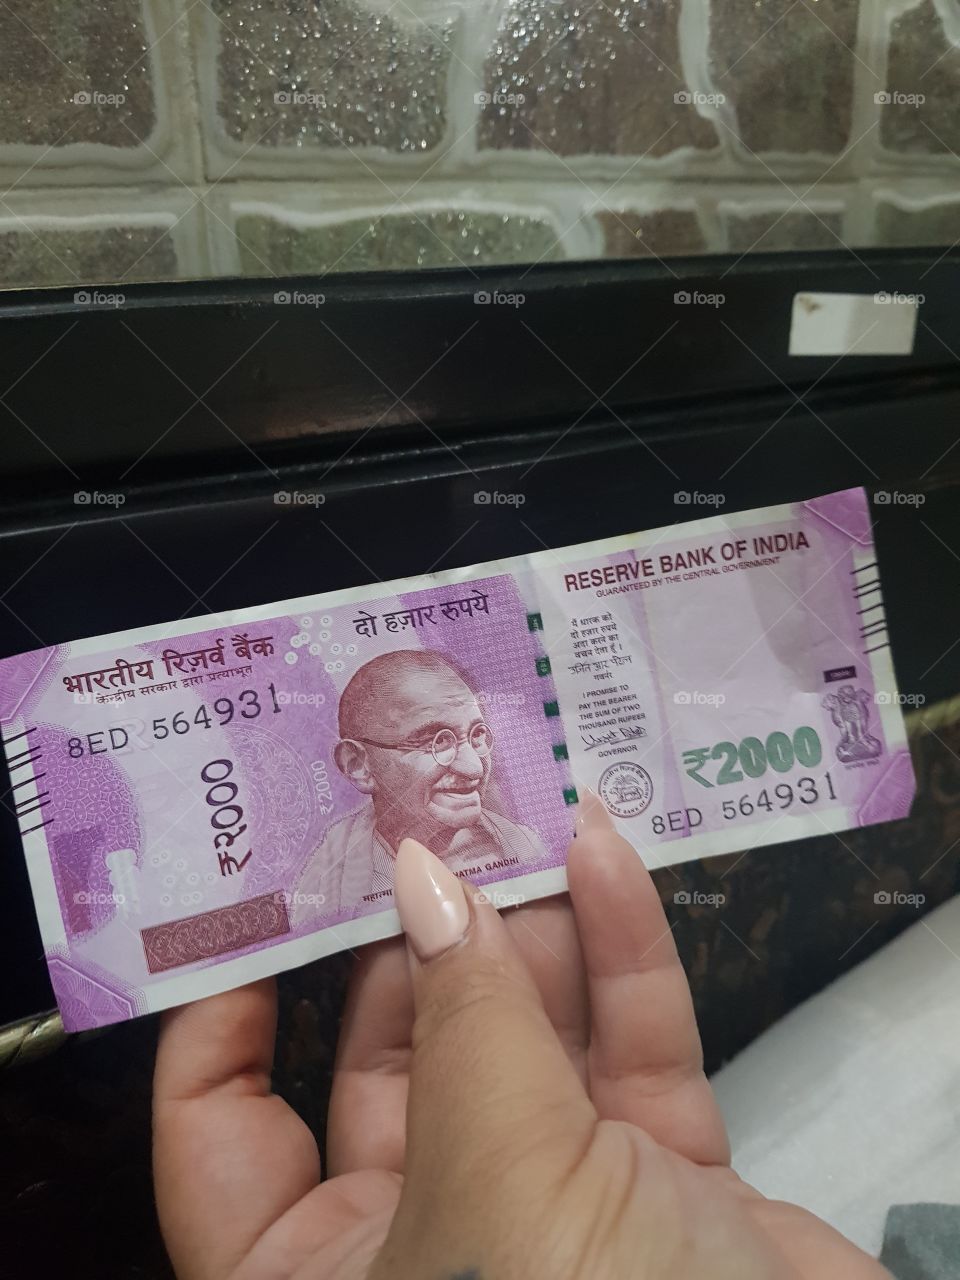 2000 Rupees